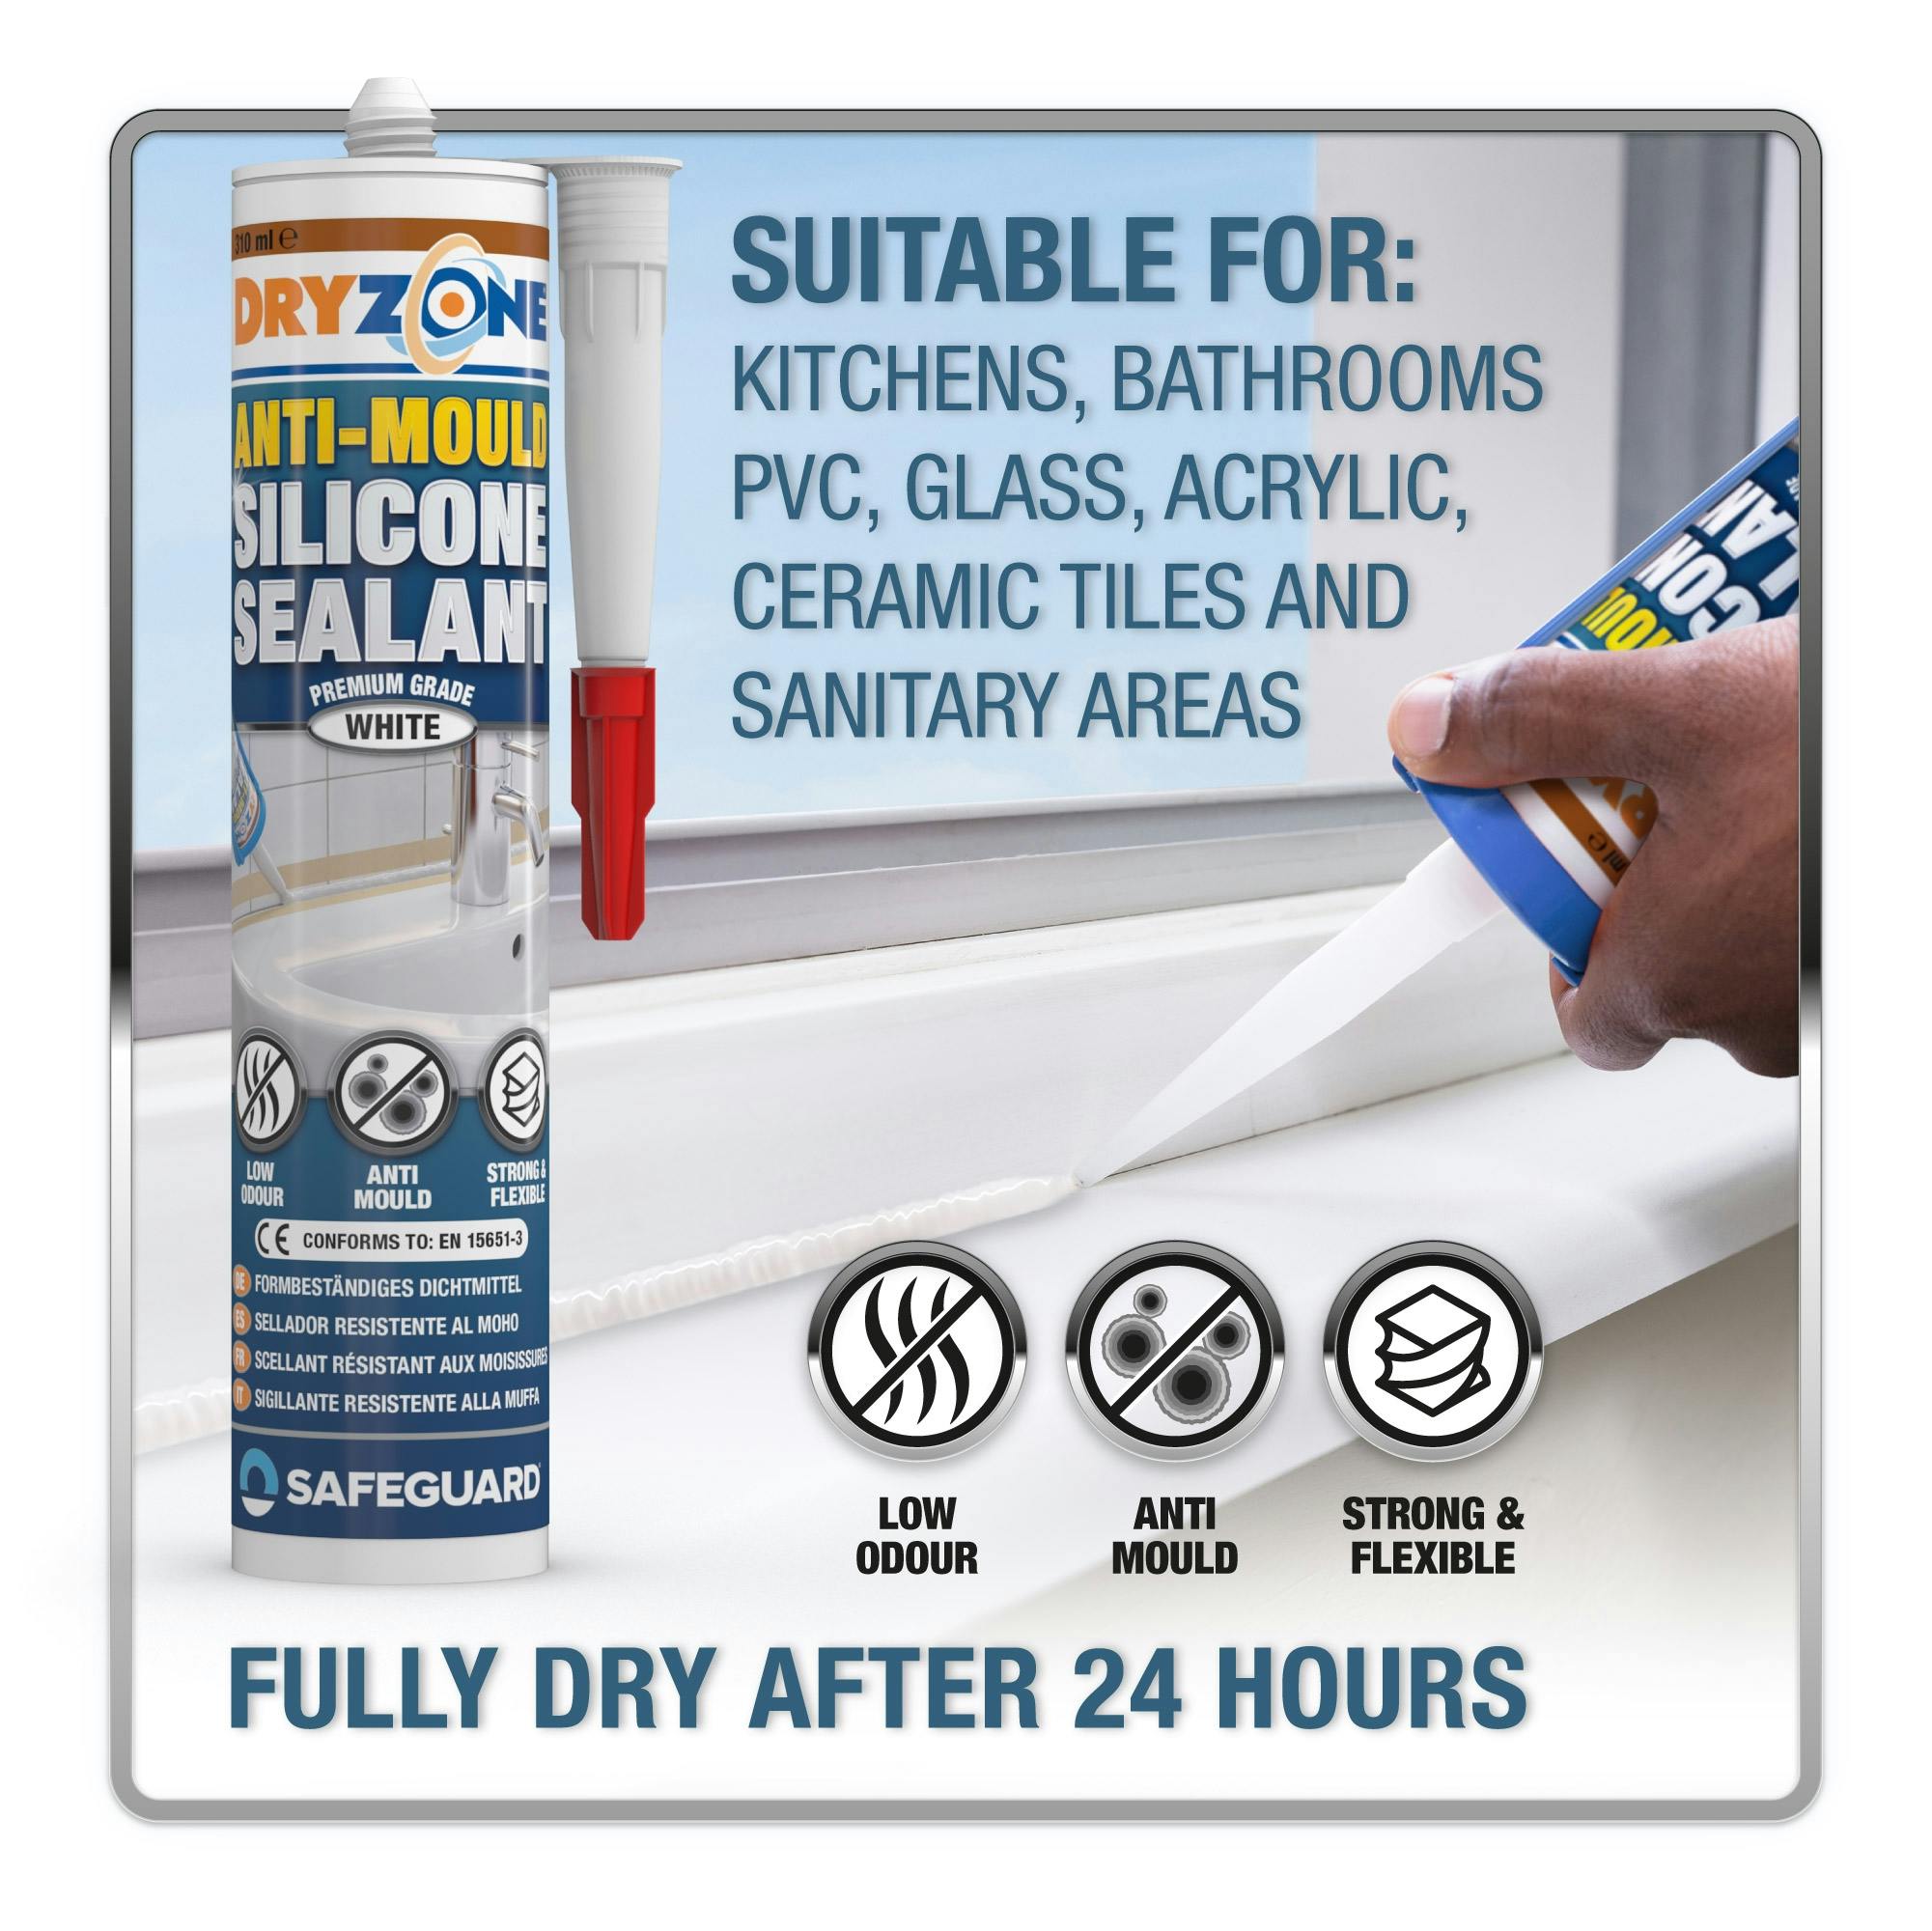 Dryzone Silicone Sealant Kit contains everything you need to reseal Bathrooms and Kitchens.